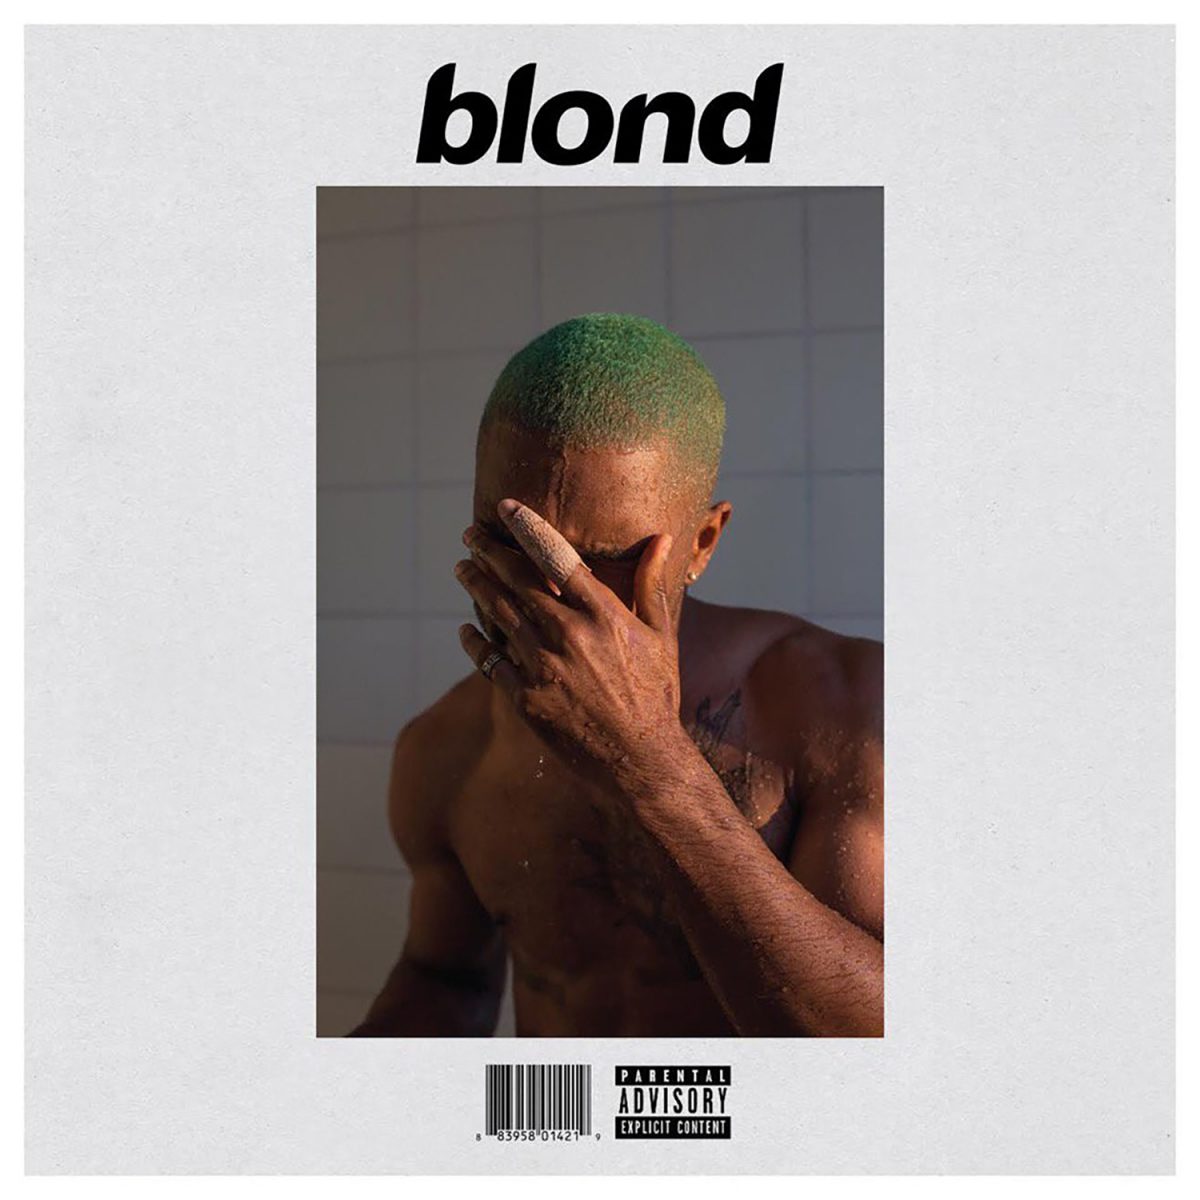 The album cover for ”Blonde” by Frank Ocean